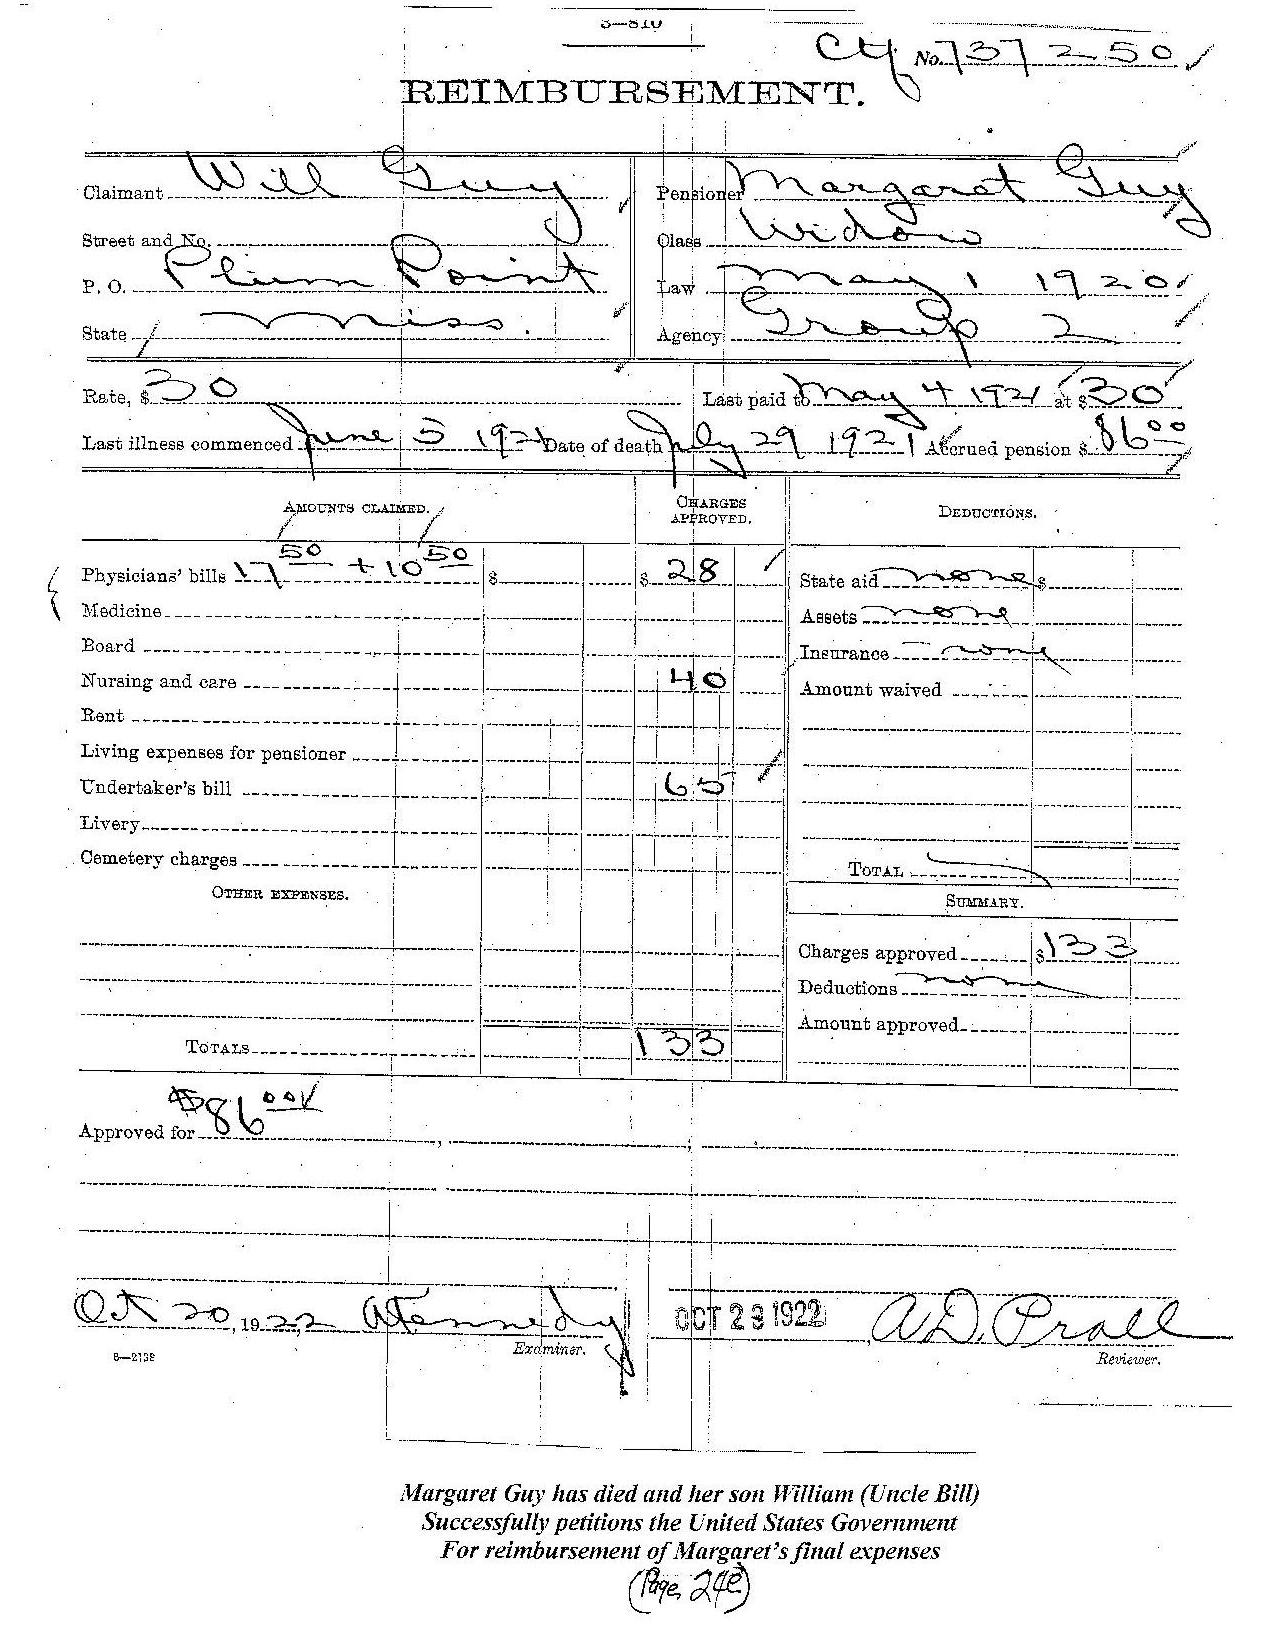 Margaret Norton-Guy has died and her son William (Uncle Bill) successfully petitions the United States Government for reimbursement of Margaret's final expenses